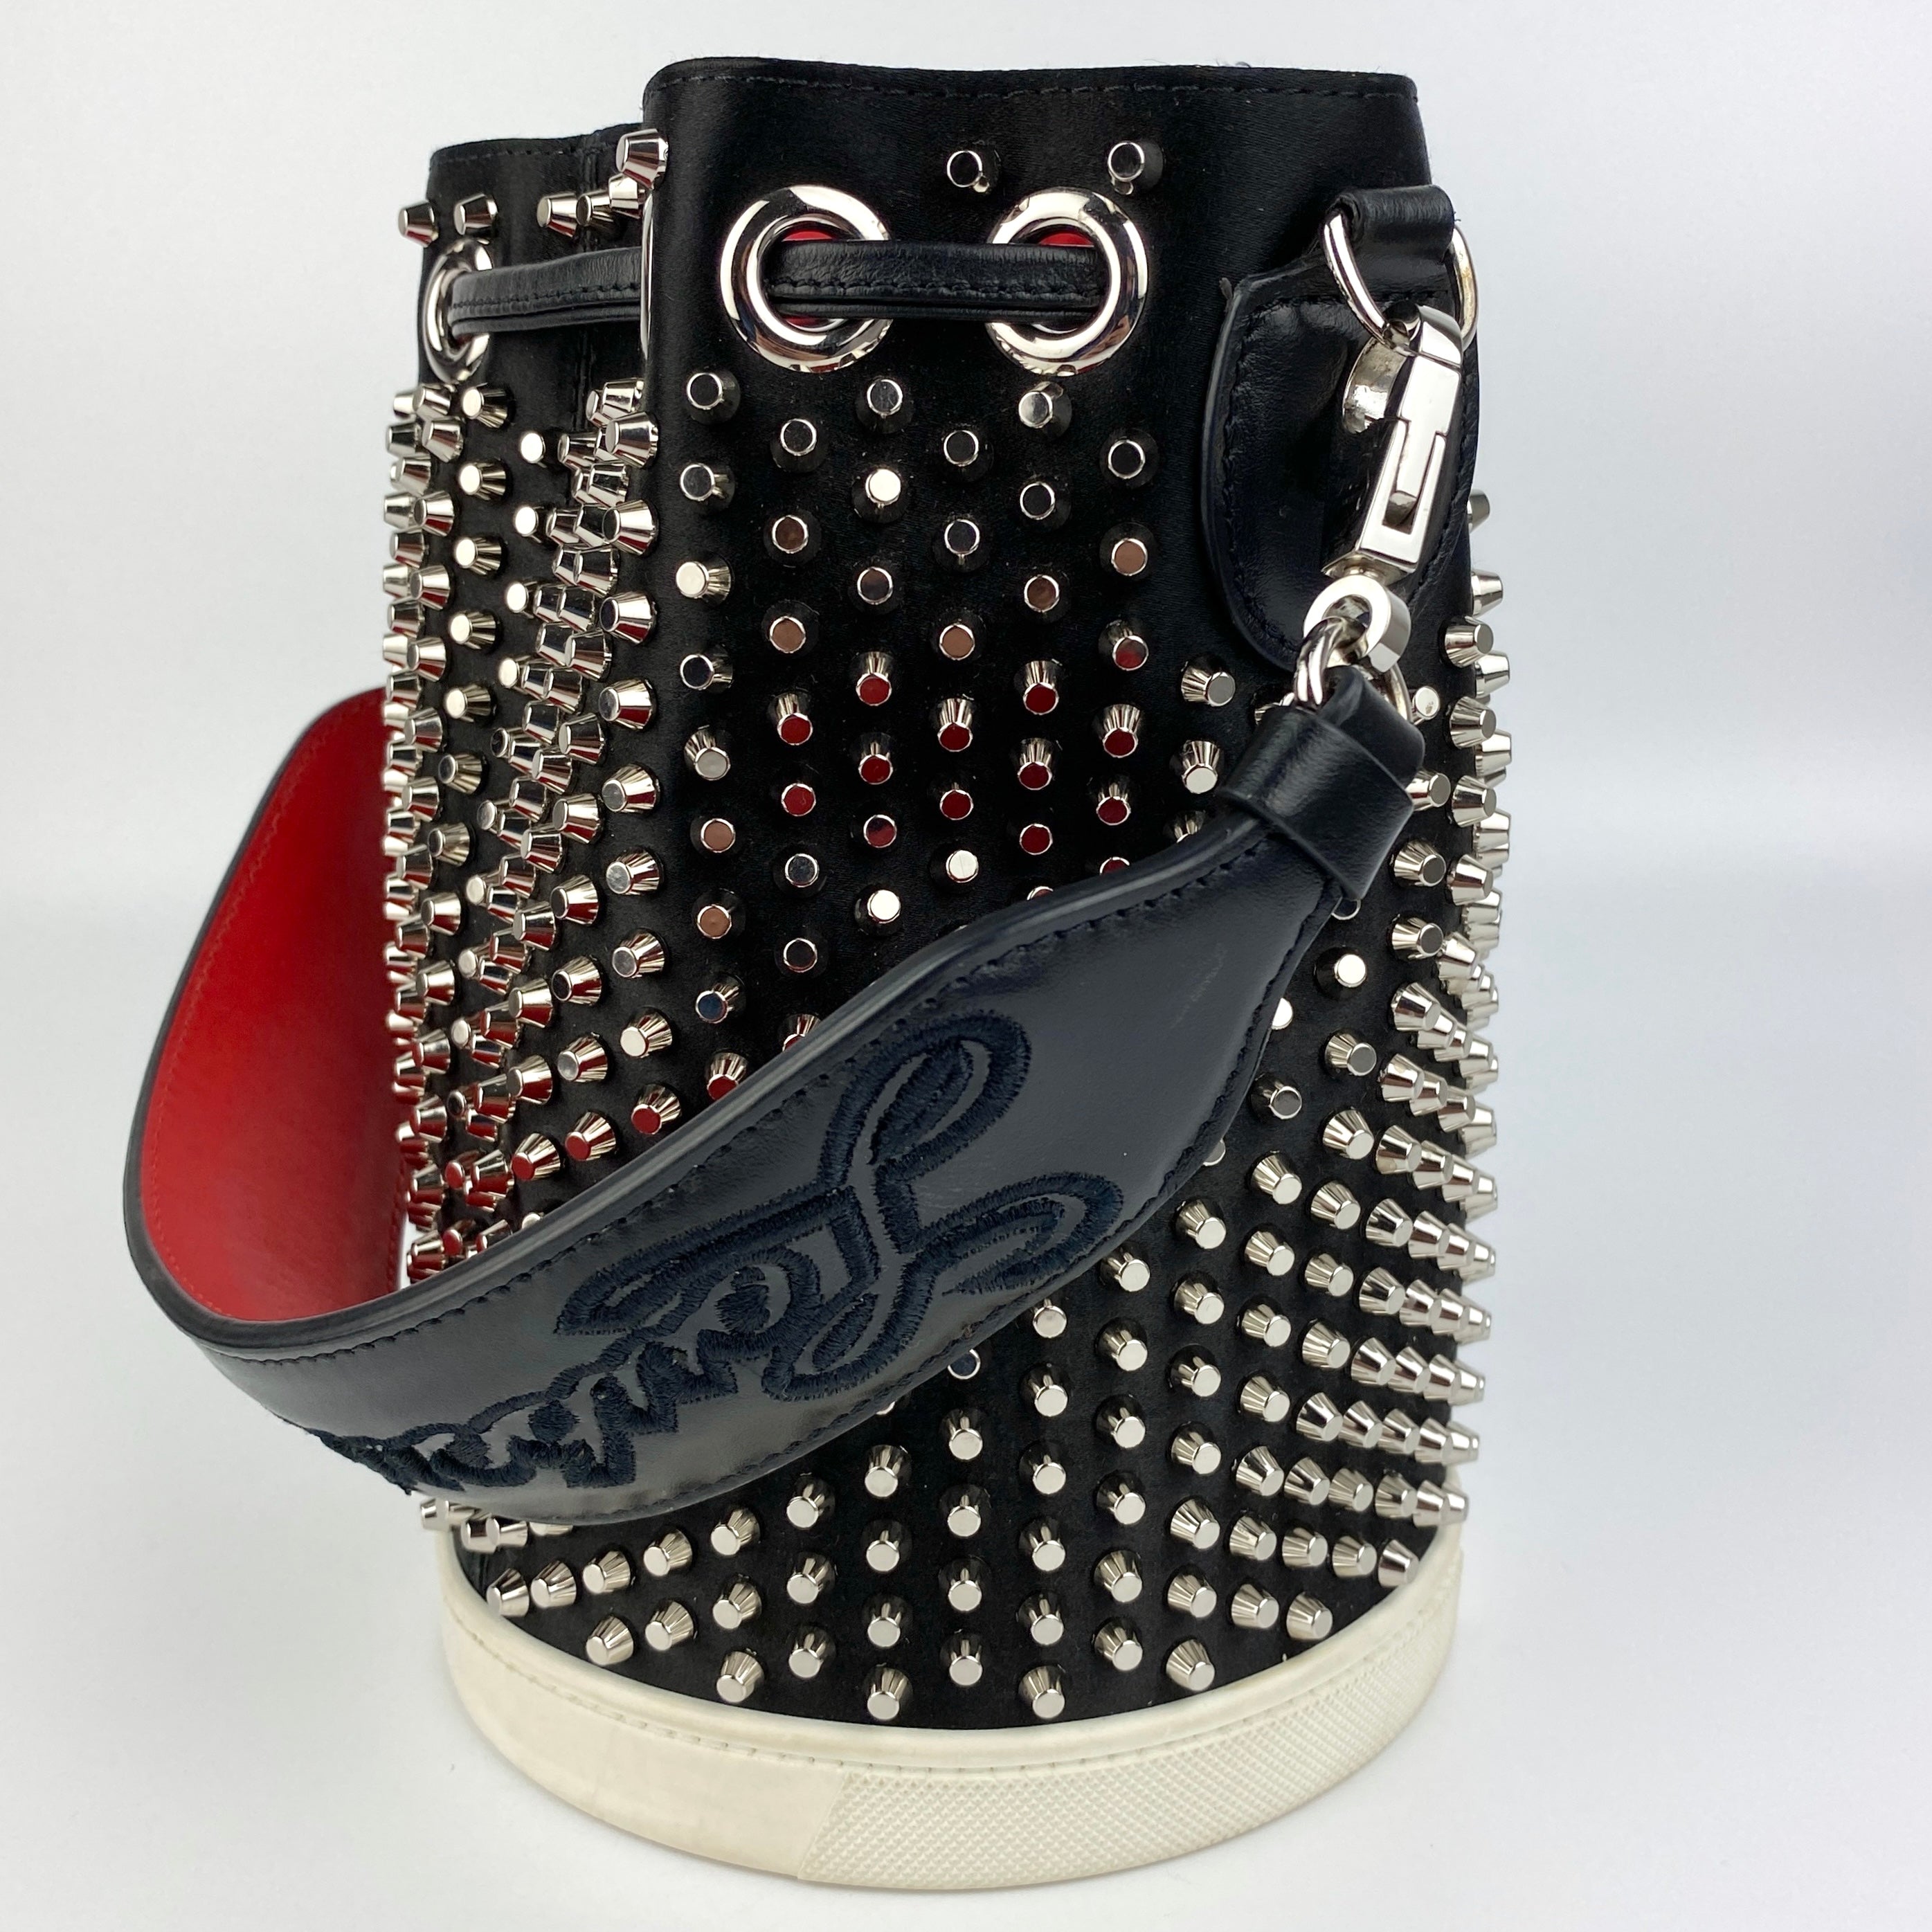 Christian Louboutin Marie Jane Studded Leather Bucket Bag in Black